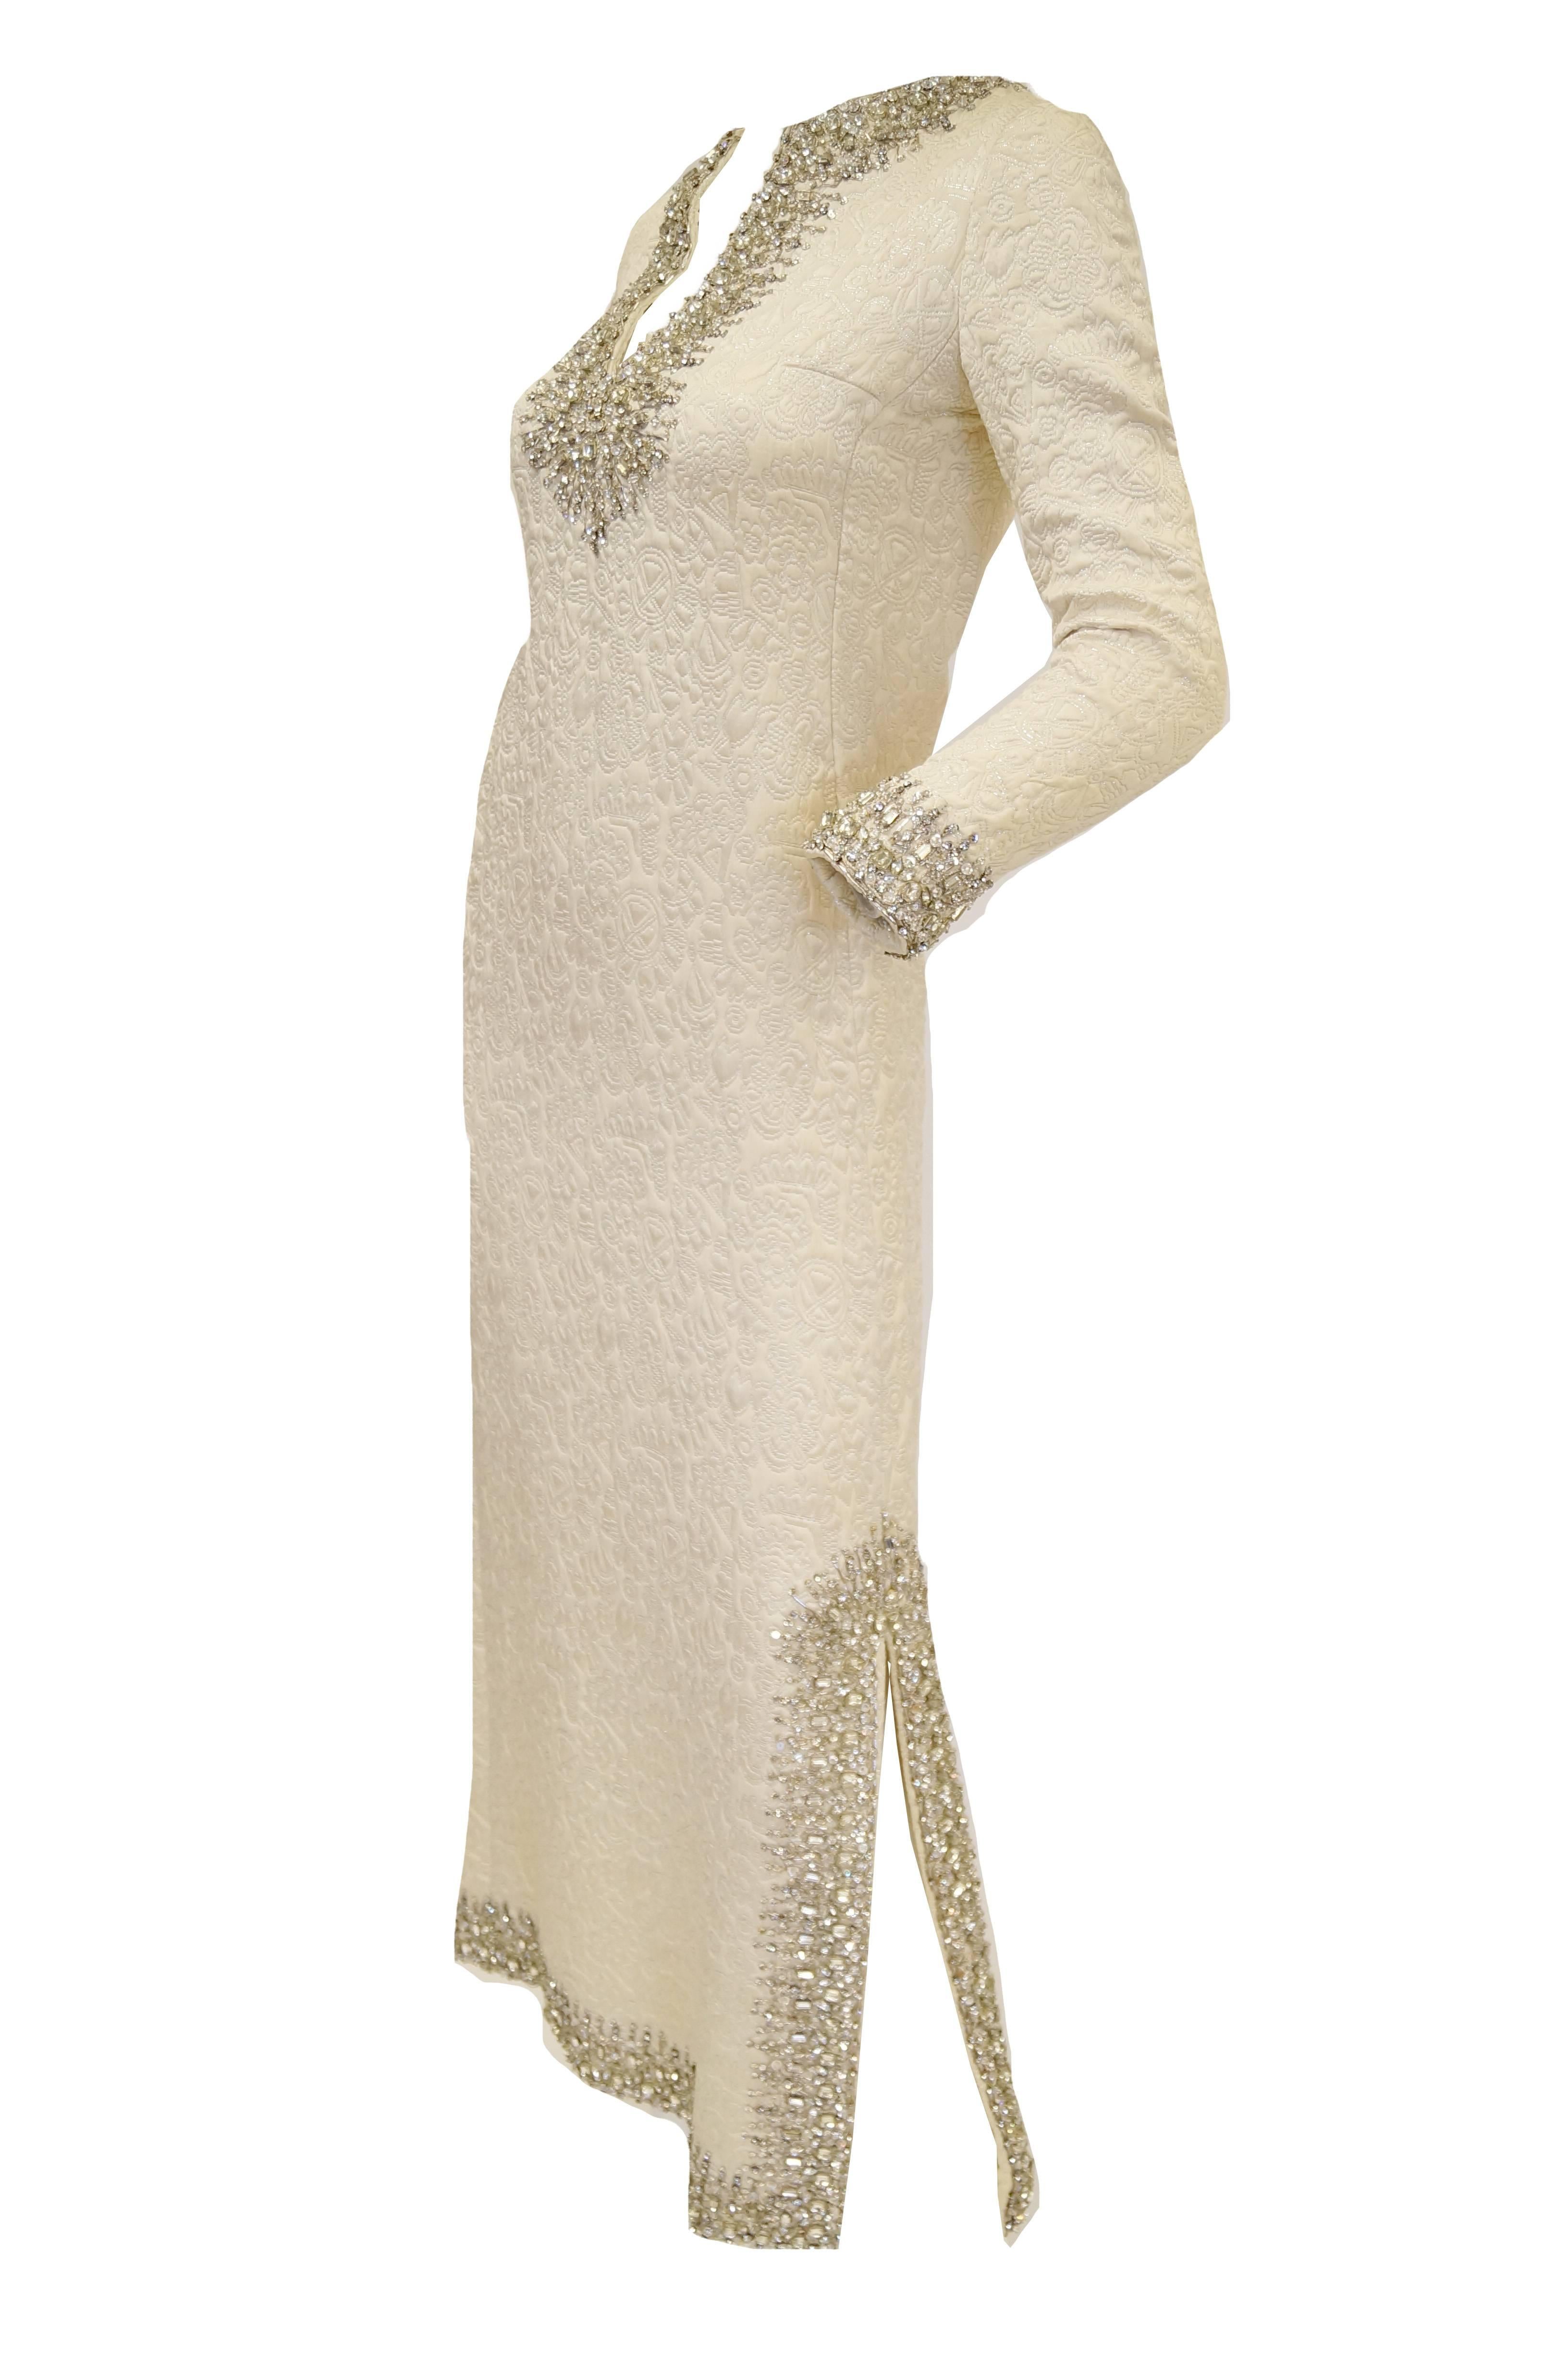 1960s Marie McCarthy for Larry Aldrich Ivory and Silver Sequin Evening Dress 1